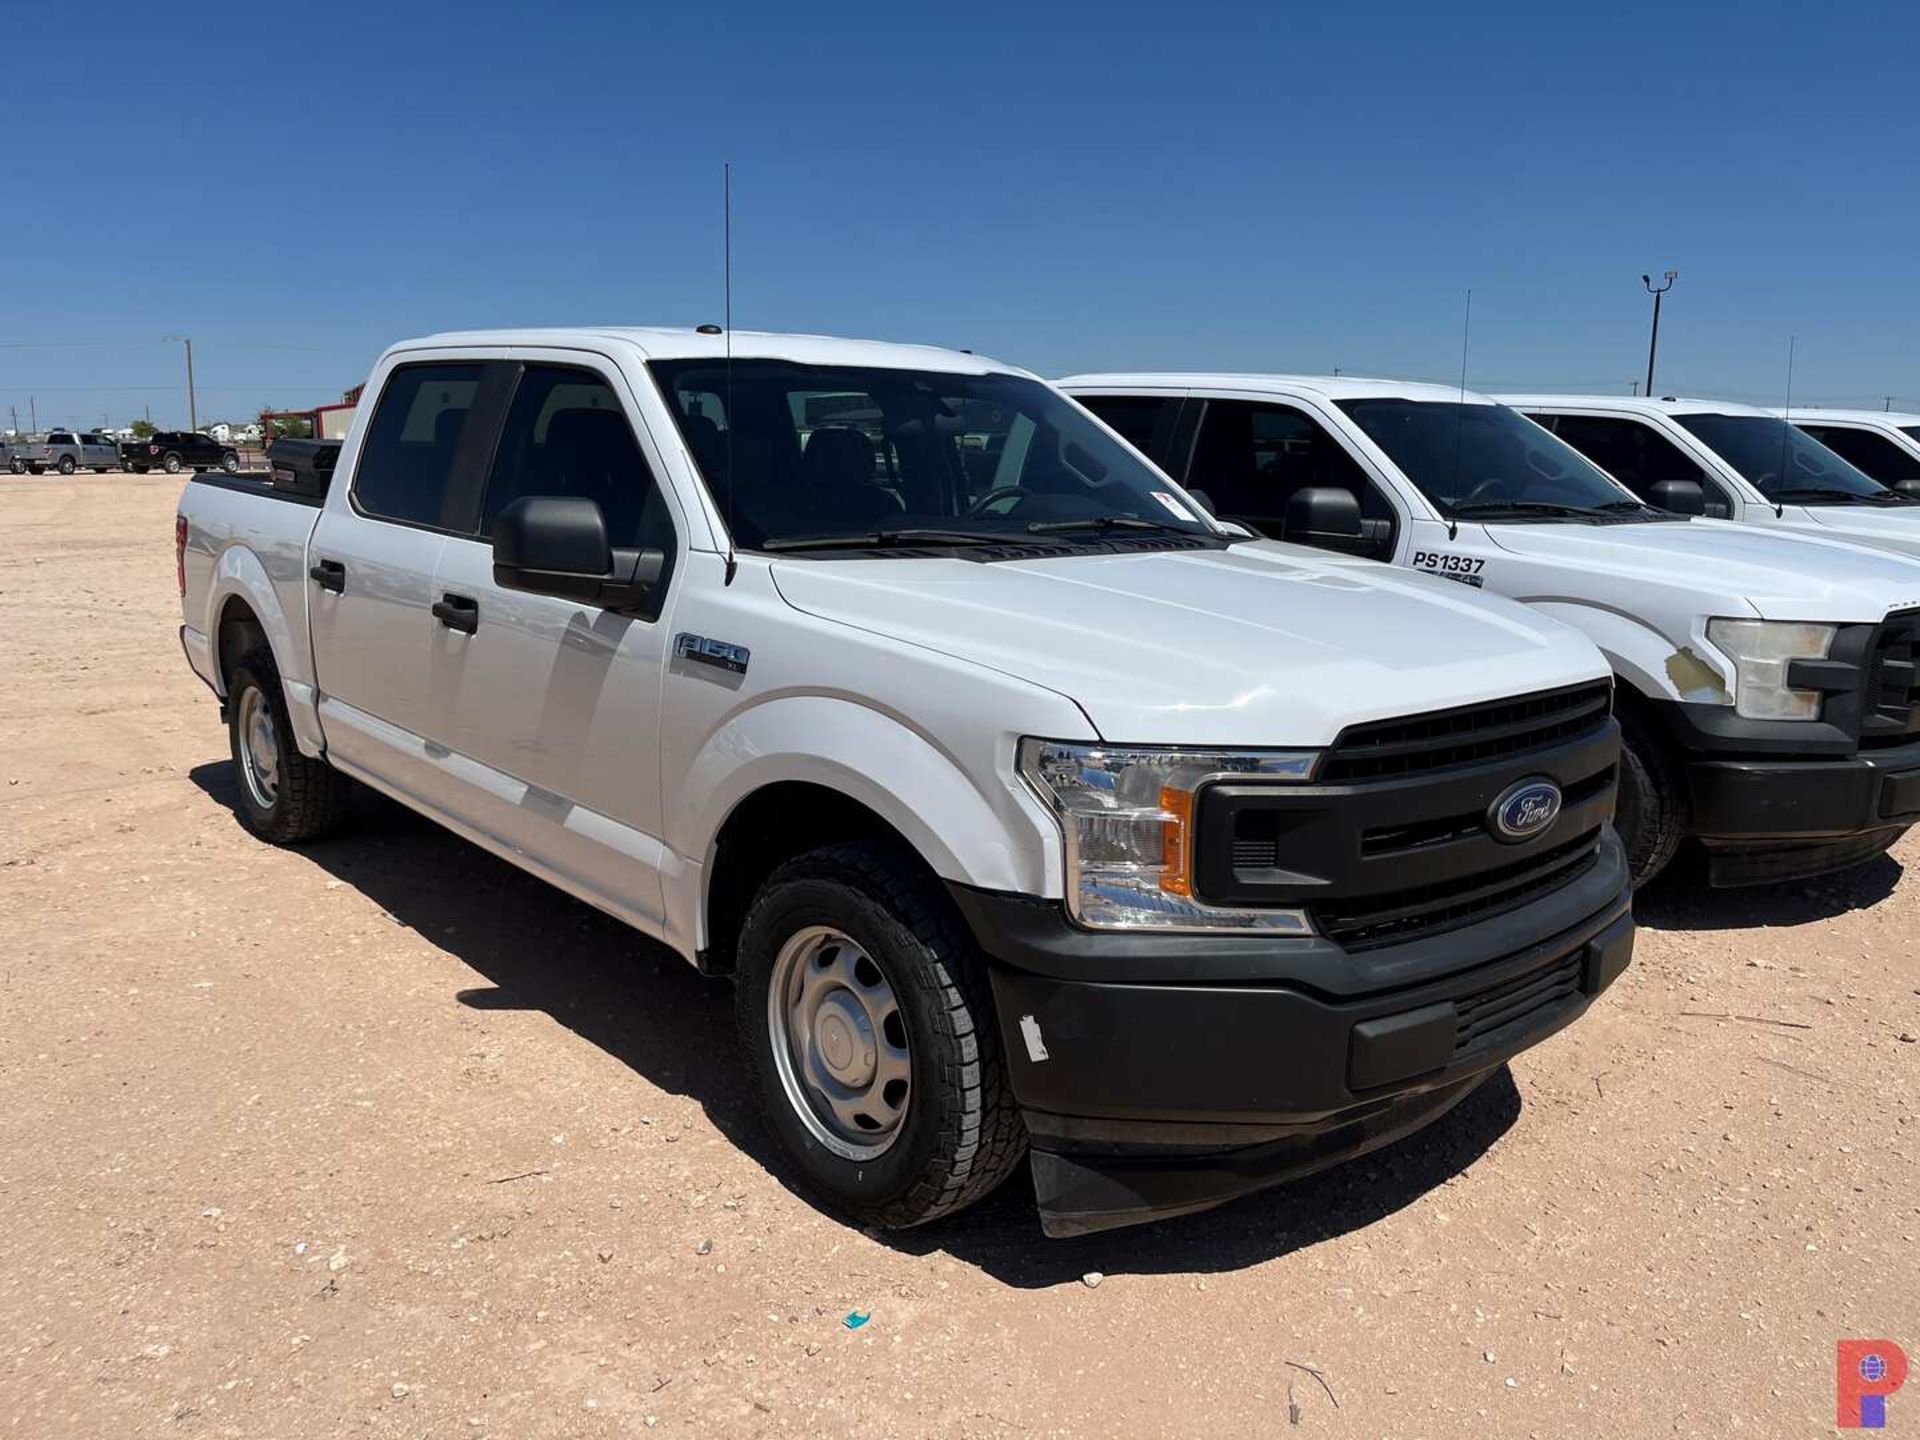 2019 FORD F-150 CREW CAB PICKUP TRUCK - Image 4 of 12